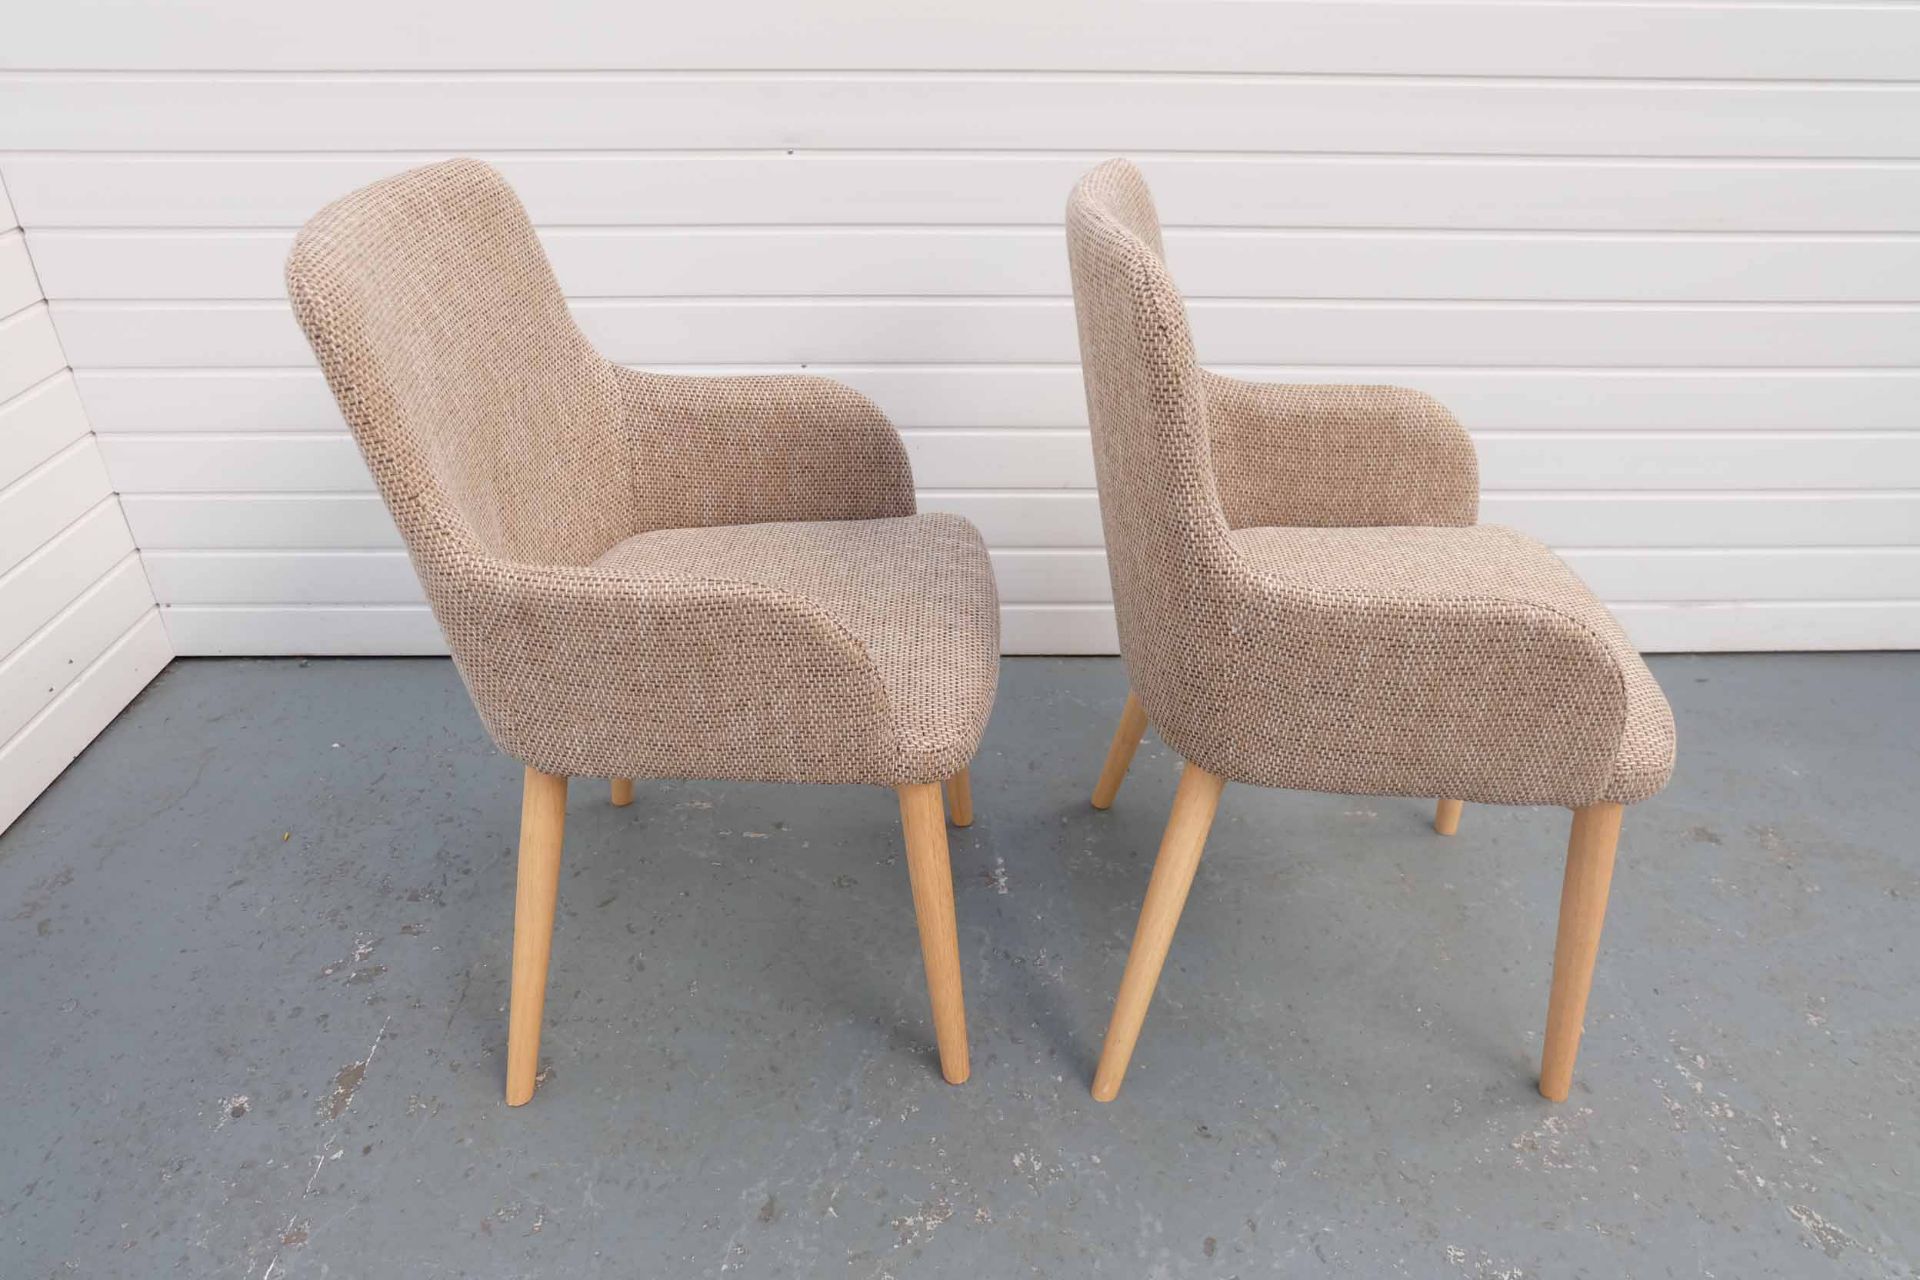 Pair of Furniture Link Upholstered Chairs. Fitted With Wooden Legs. - Image 3 of 4